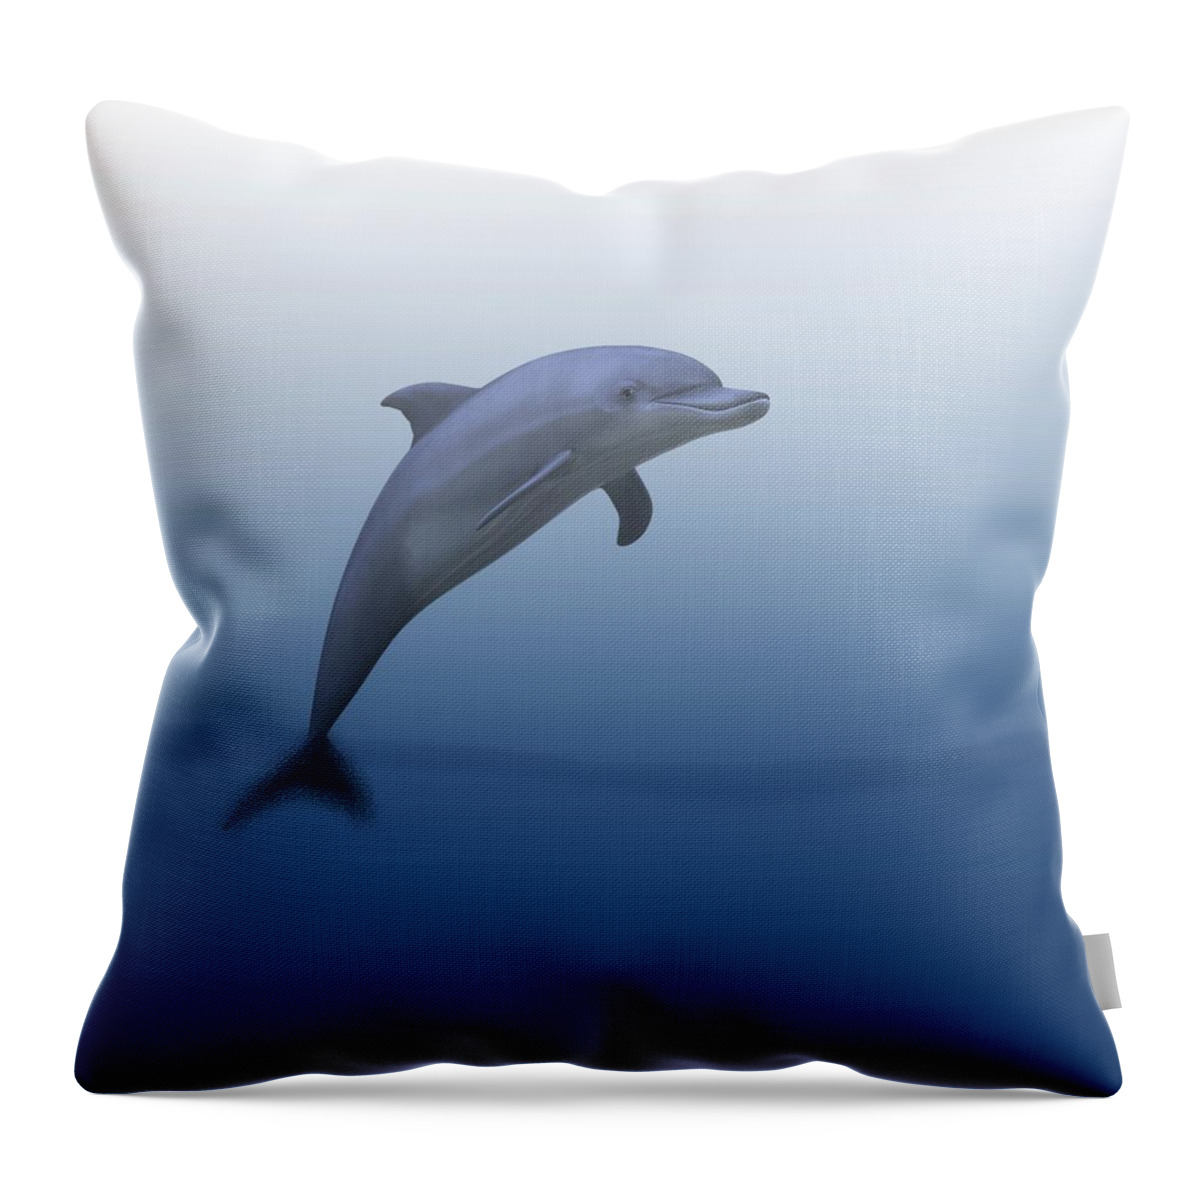 Dolphin Throw Pillow featuring the digital art Dolphin In Ocean Blue by Movie Poster Prints